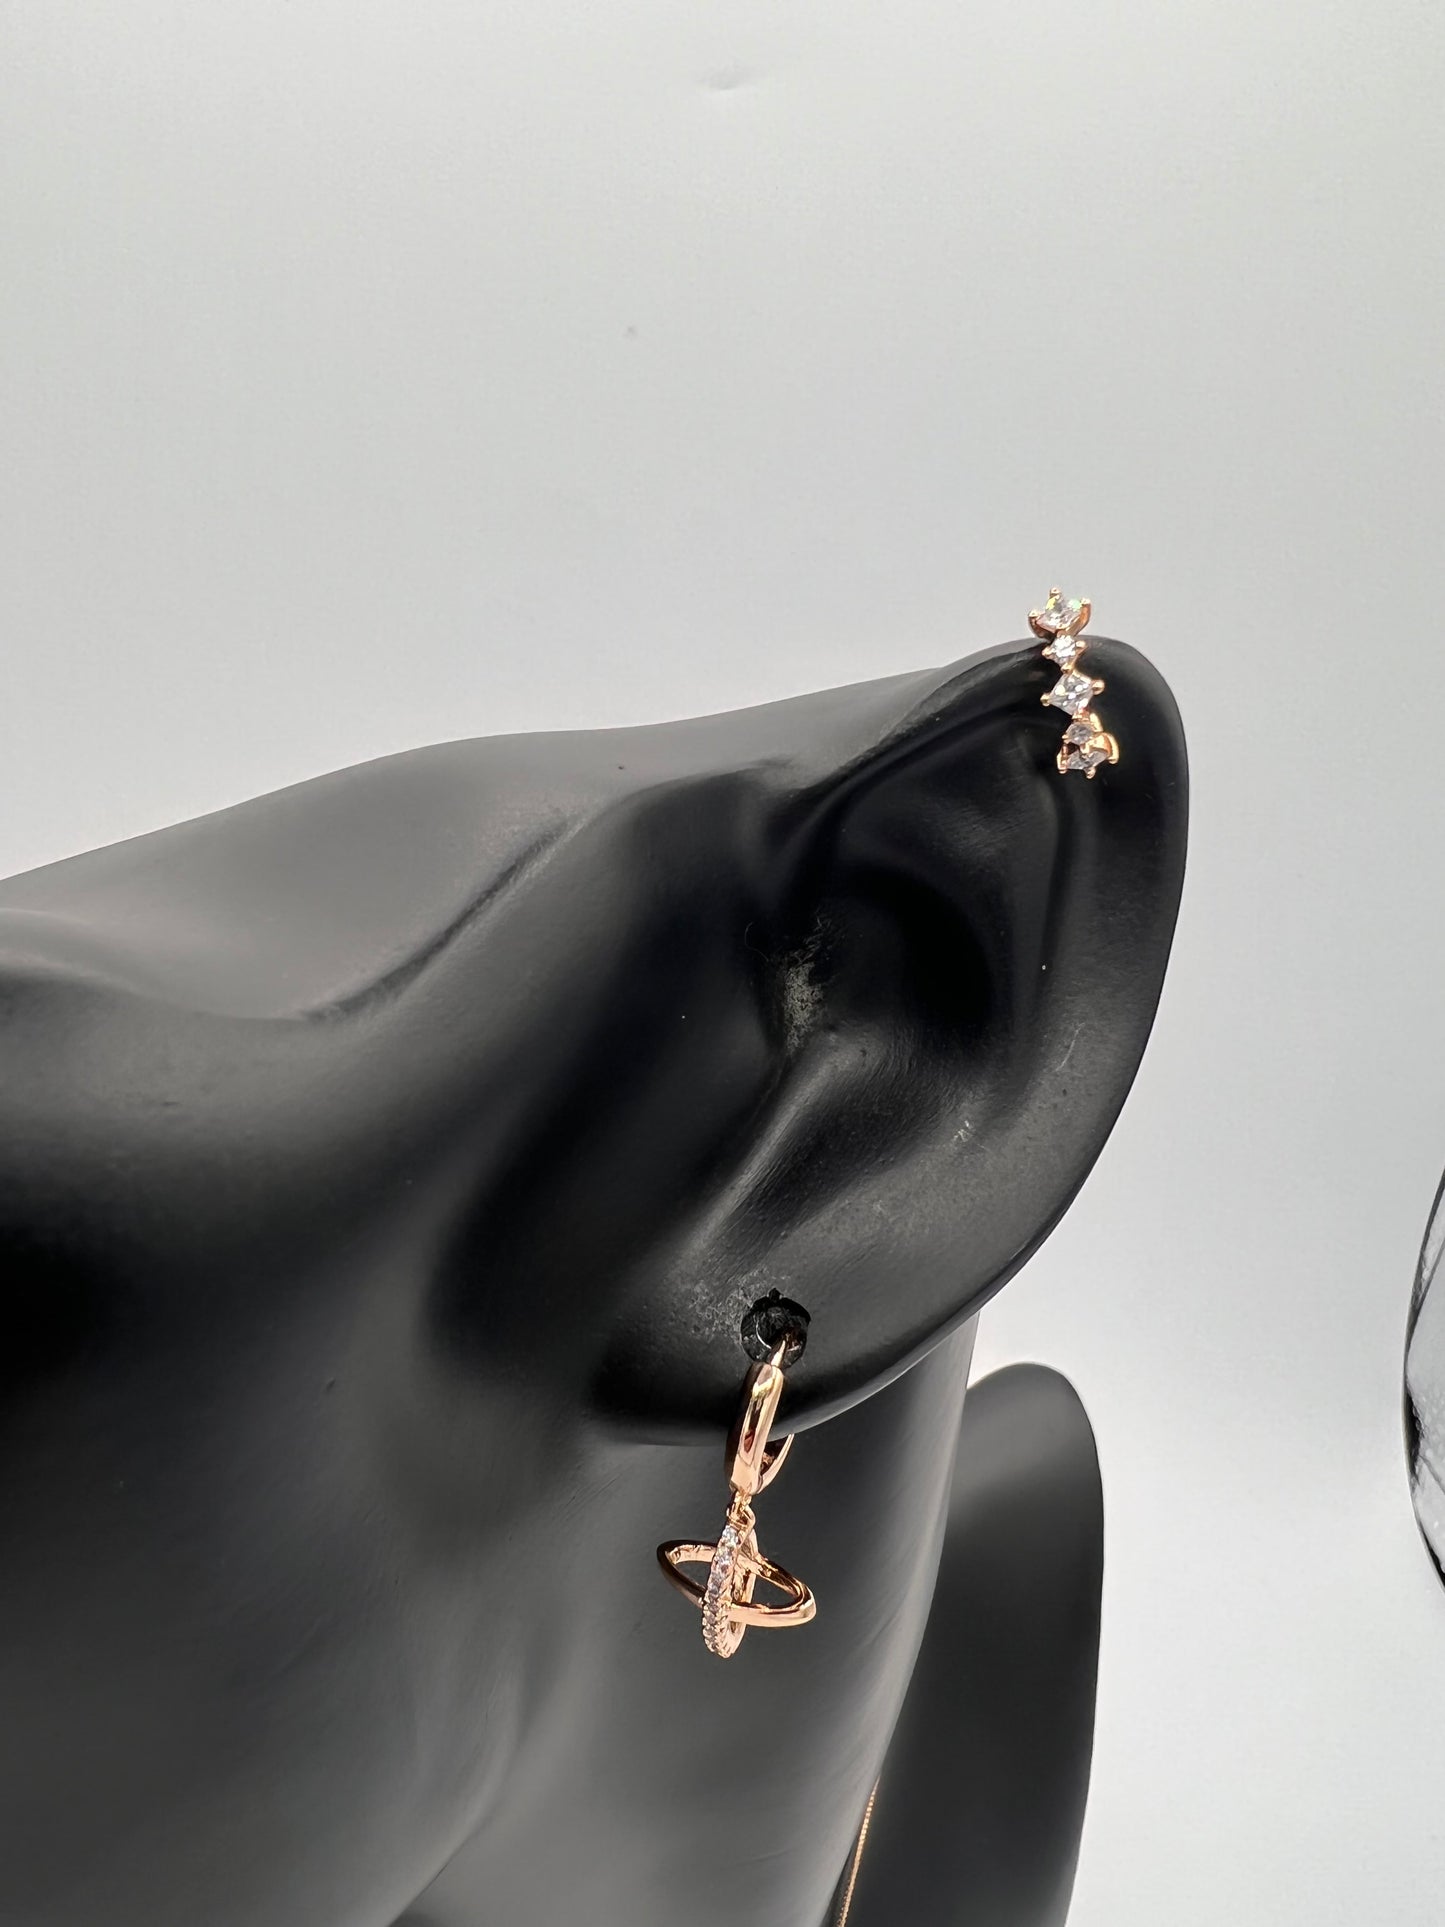 18k gold plated ear cuff can be used without the piercing hypoallergenic 